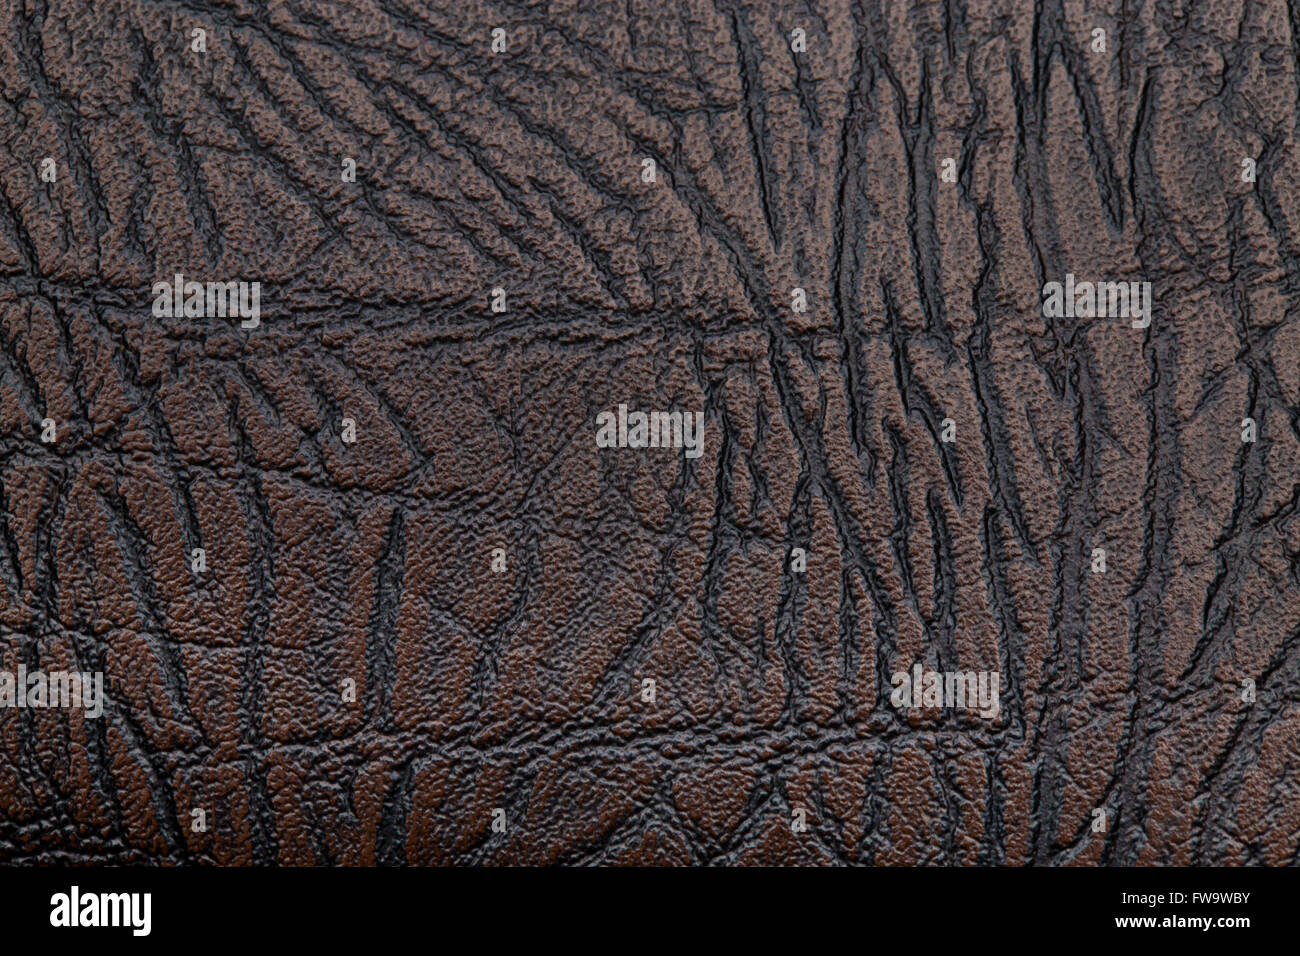 brown leather texture background, close-up photo Stock Photo